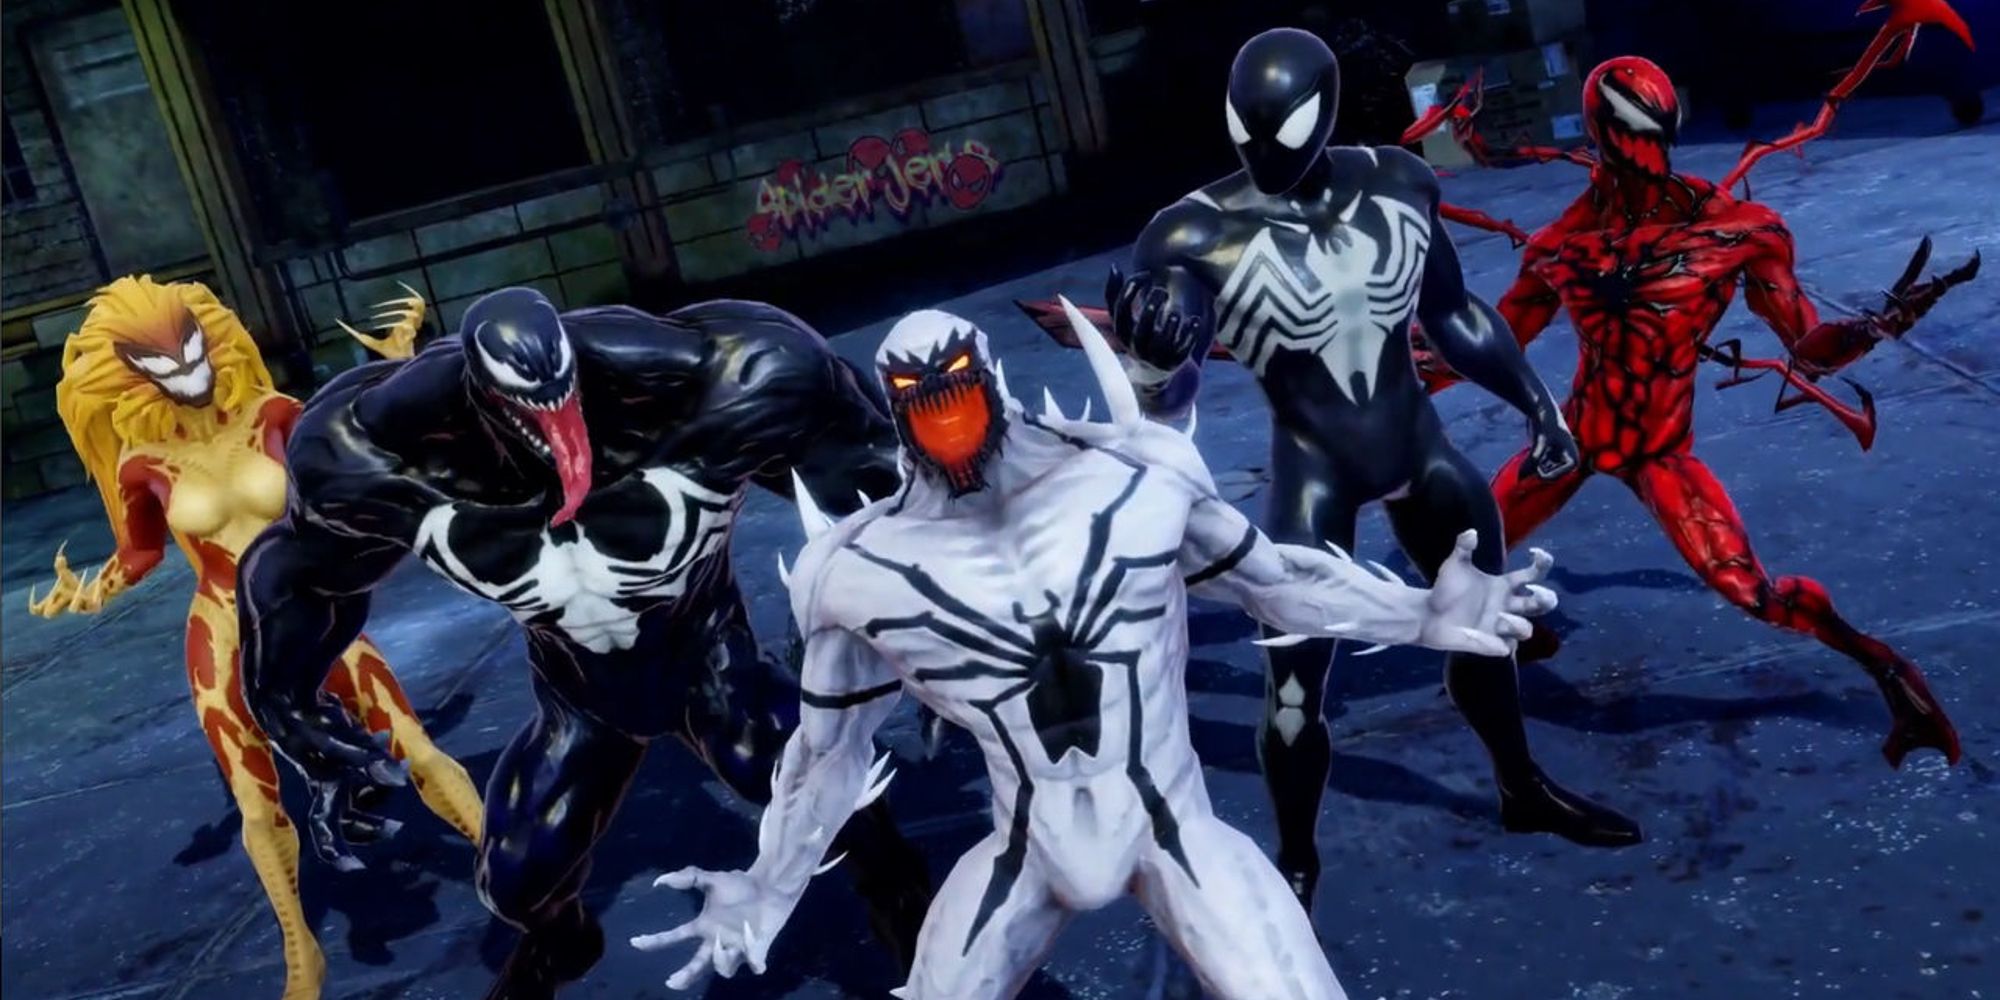 Venom and the other Symbiote characters assembled in Marvel Strike Force